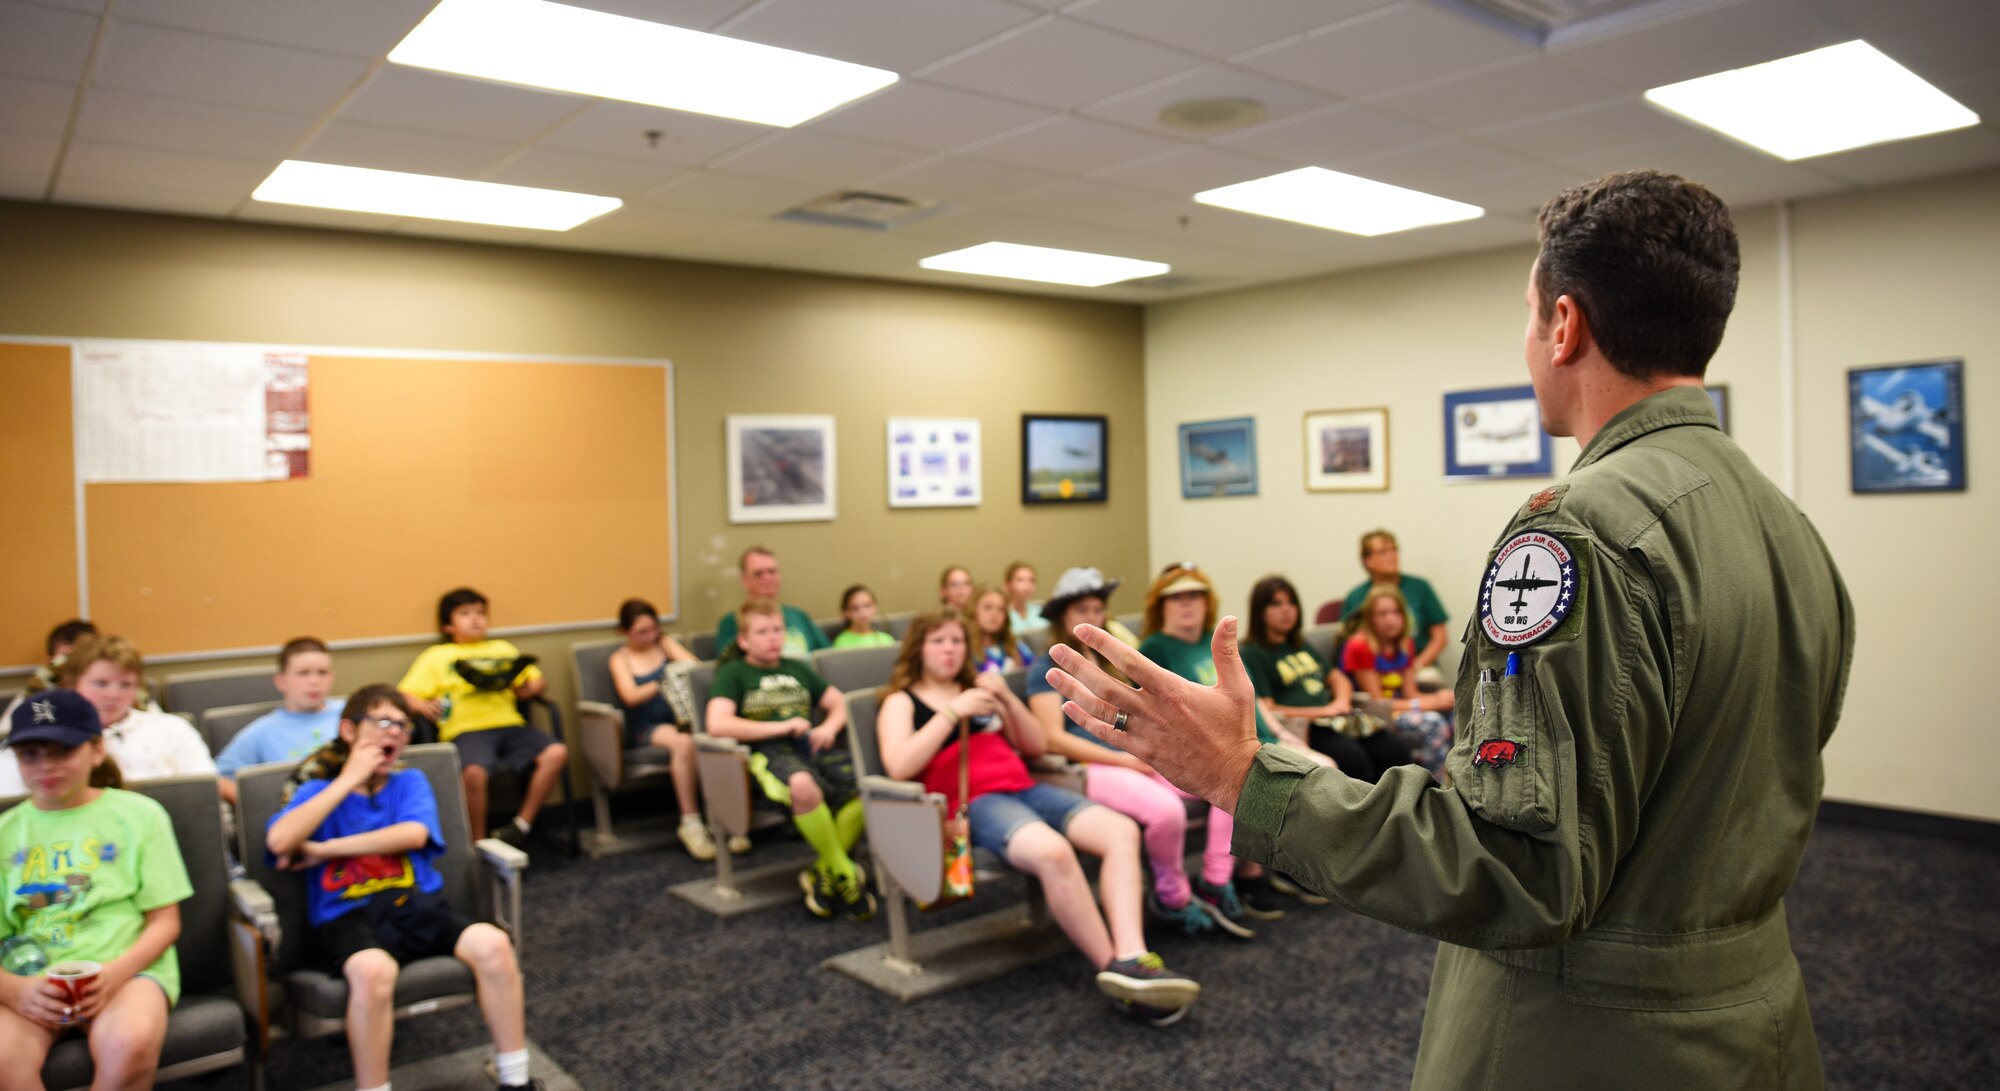 Students of the Alma School District are taught about the remotely piloted aircraft mission from an RPA pilot June 8, 2016, during their tour of the 188th Wing at Ebbing Air National Guard Base, Fort Smith, Ark. The students are part of an Alma School District learning program called Camp Airedale that has a curriculum centered on experience-based activities and uses out-of-classroom and off-campus activities than are available during the typical school year. (U.S. Air National Guard photo by Senior Airman Cody Martin/Released)